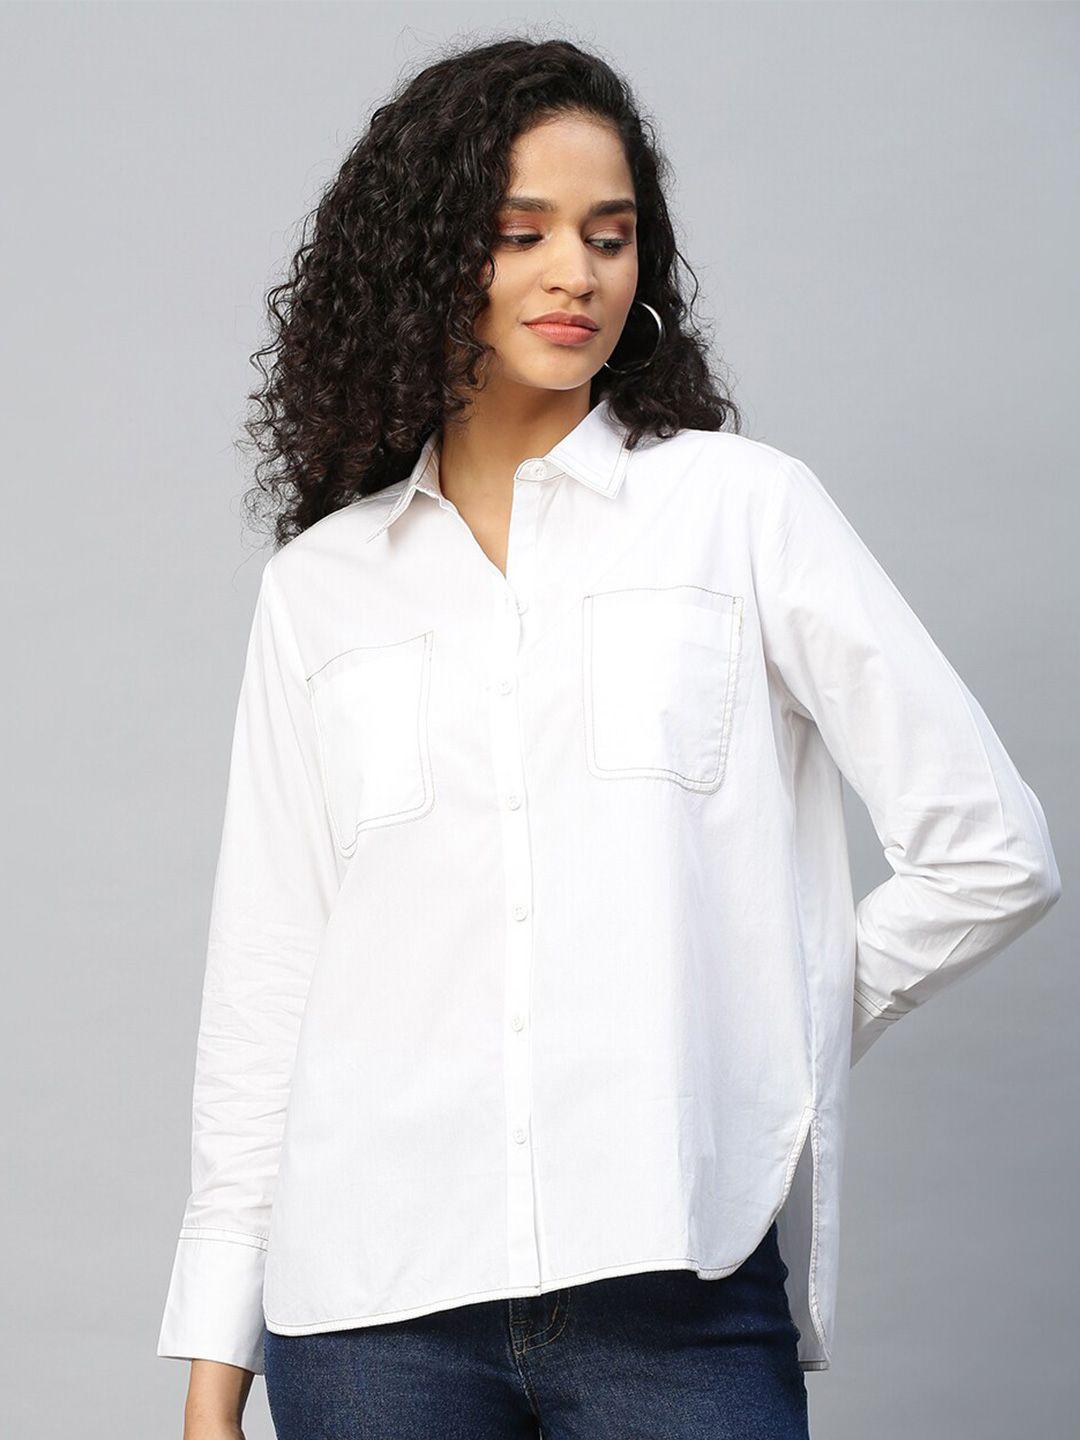 chemistry white shirt style top